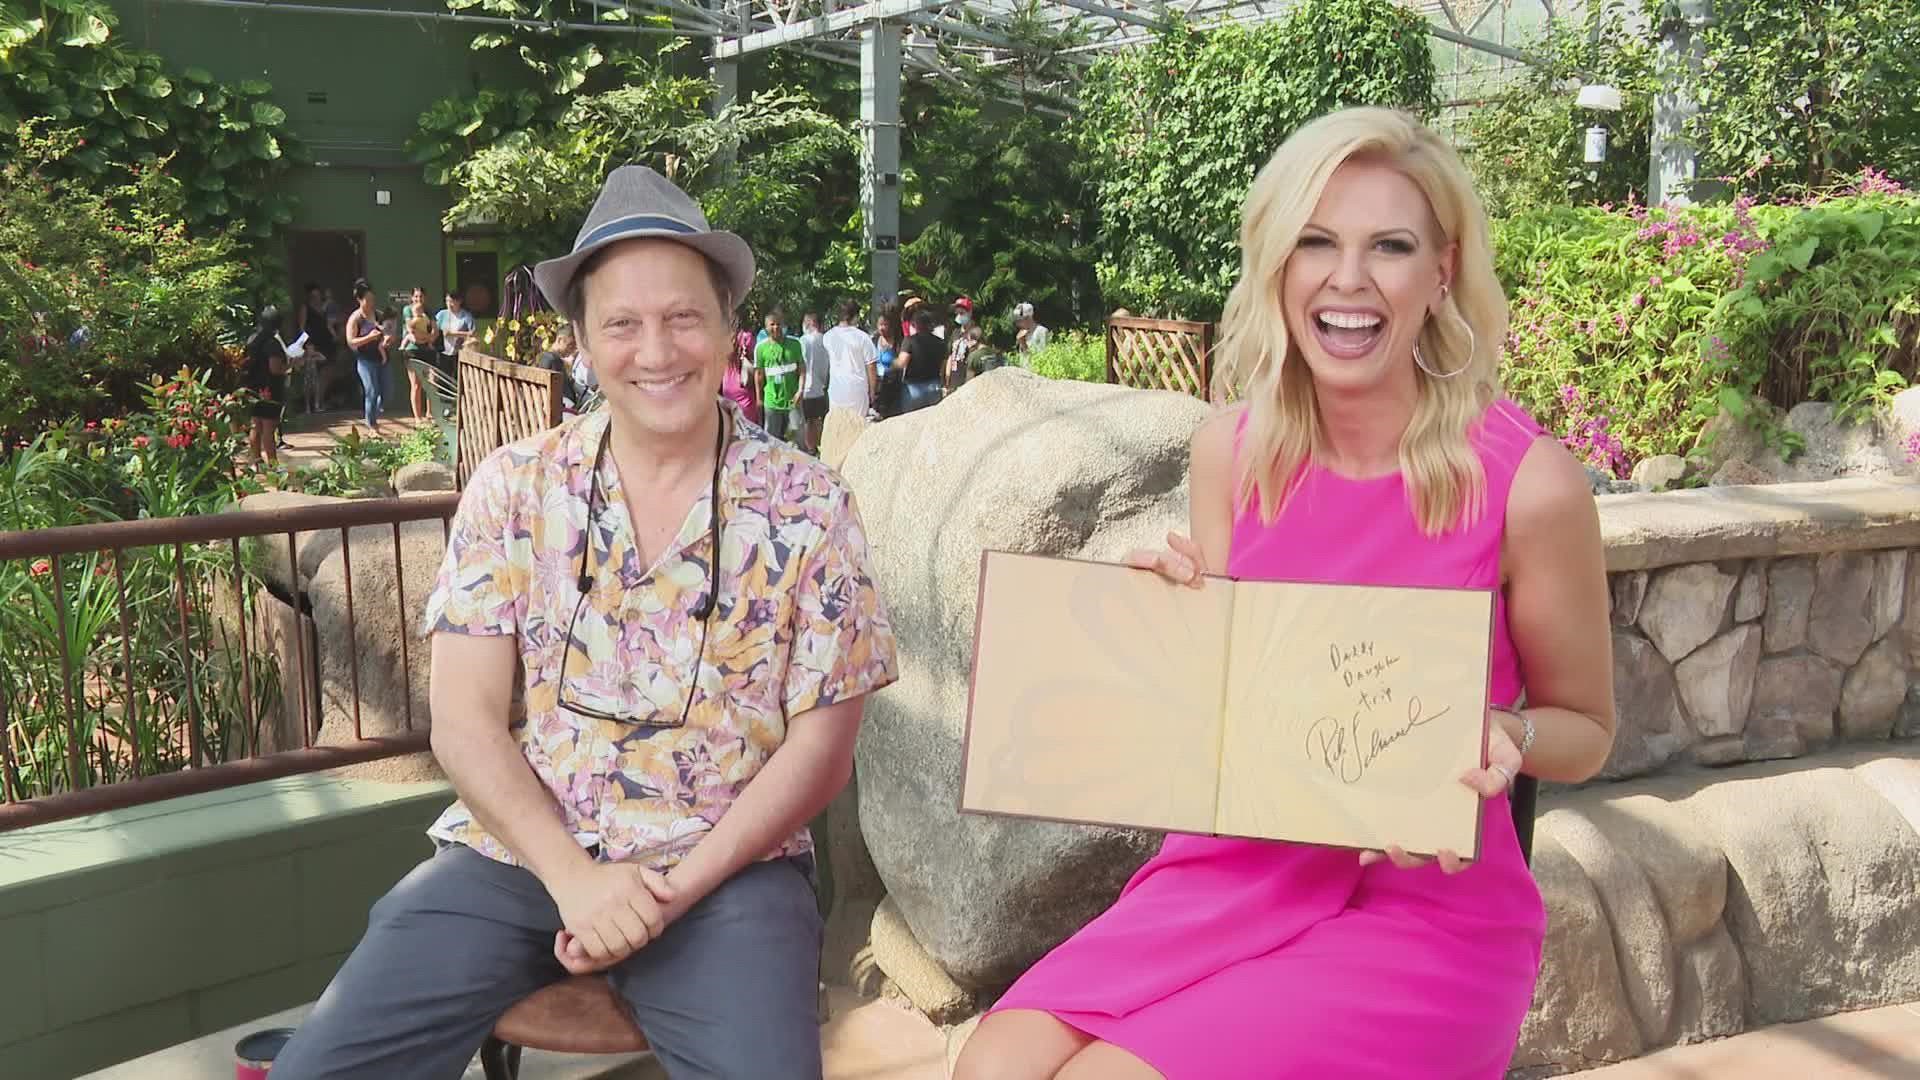 Actor and Valley resident Rob Schneider sits down with Krystle Henderson to talk about his new movie "Daddy Daughter Trip."